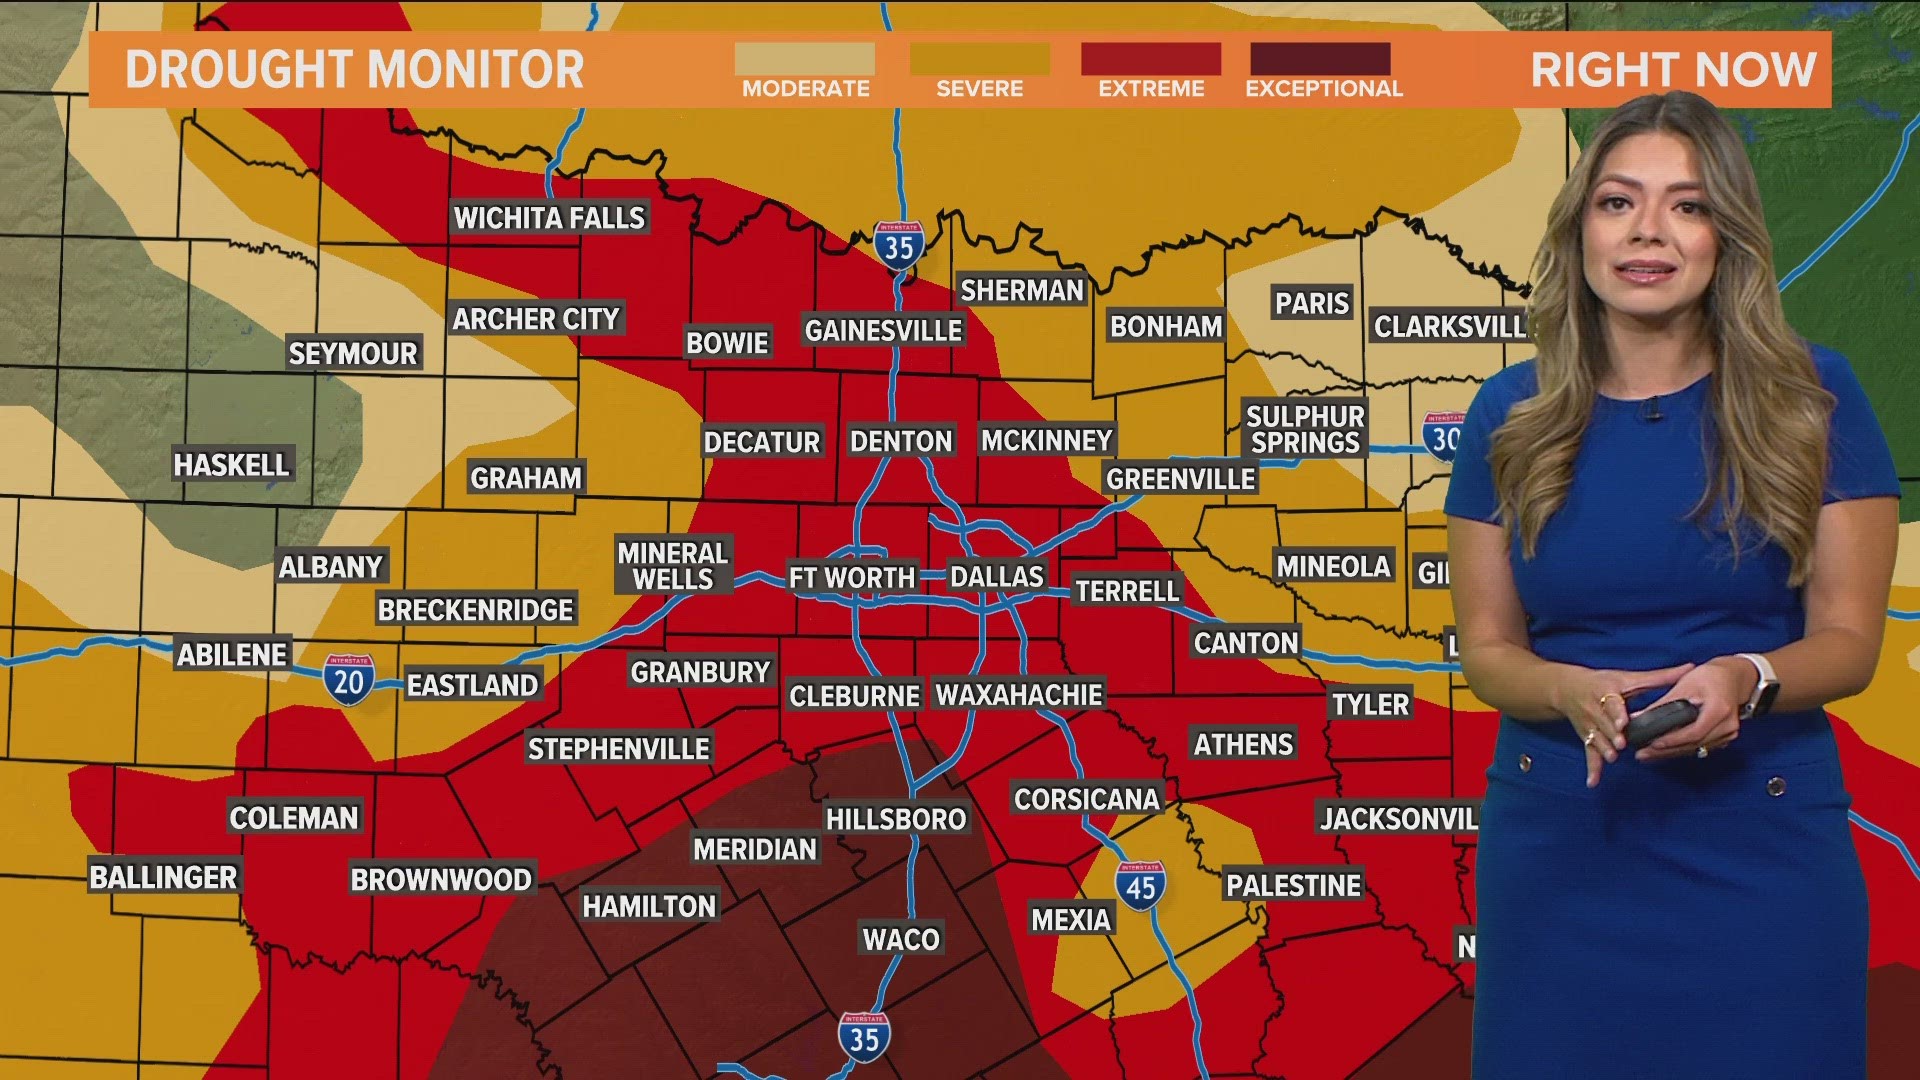 WFAA meteorologist Mariel Ruiz explains the timeline for updated drought monitors to be released.